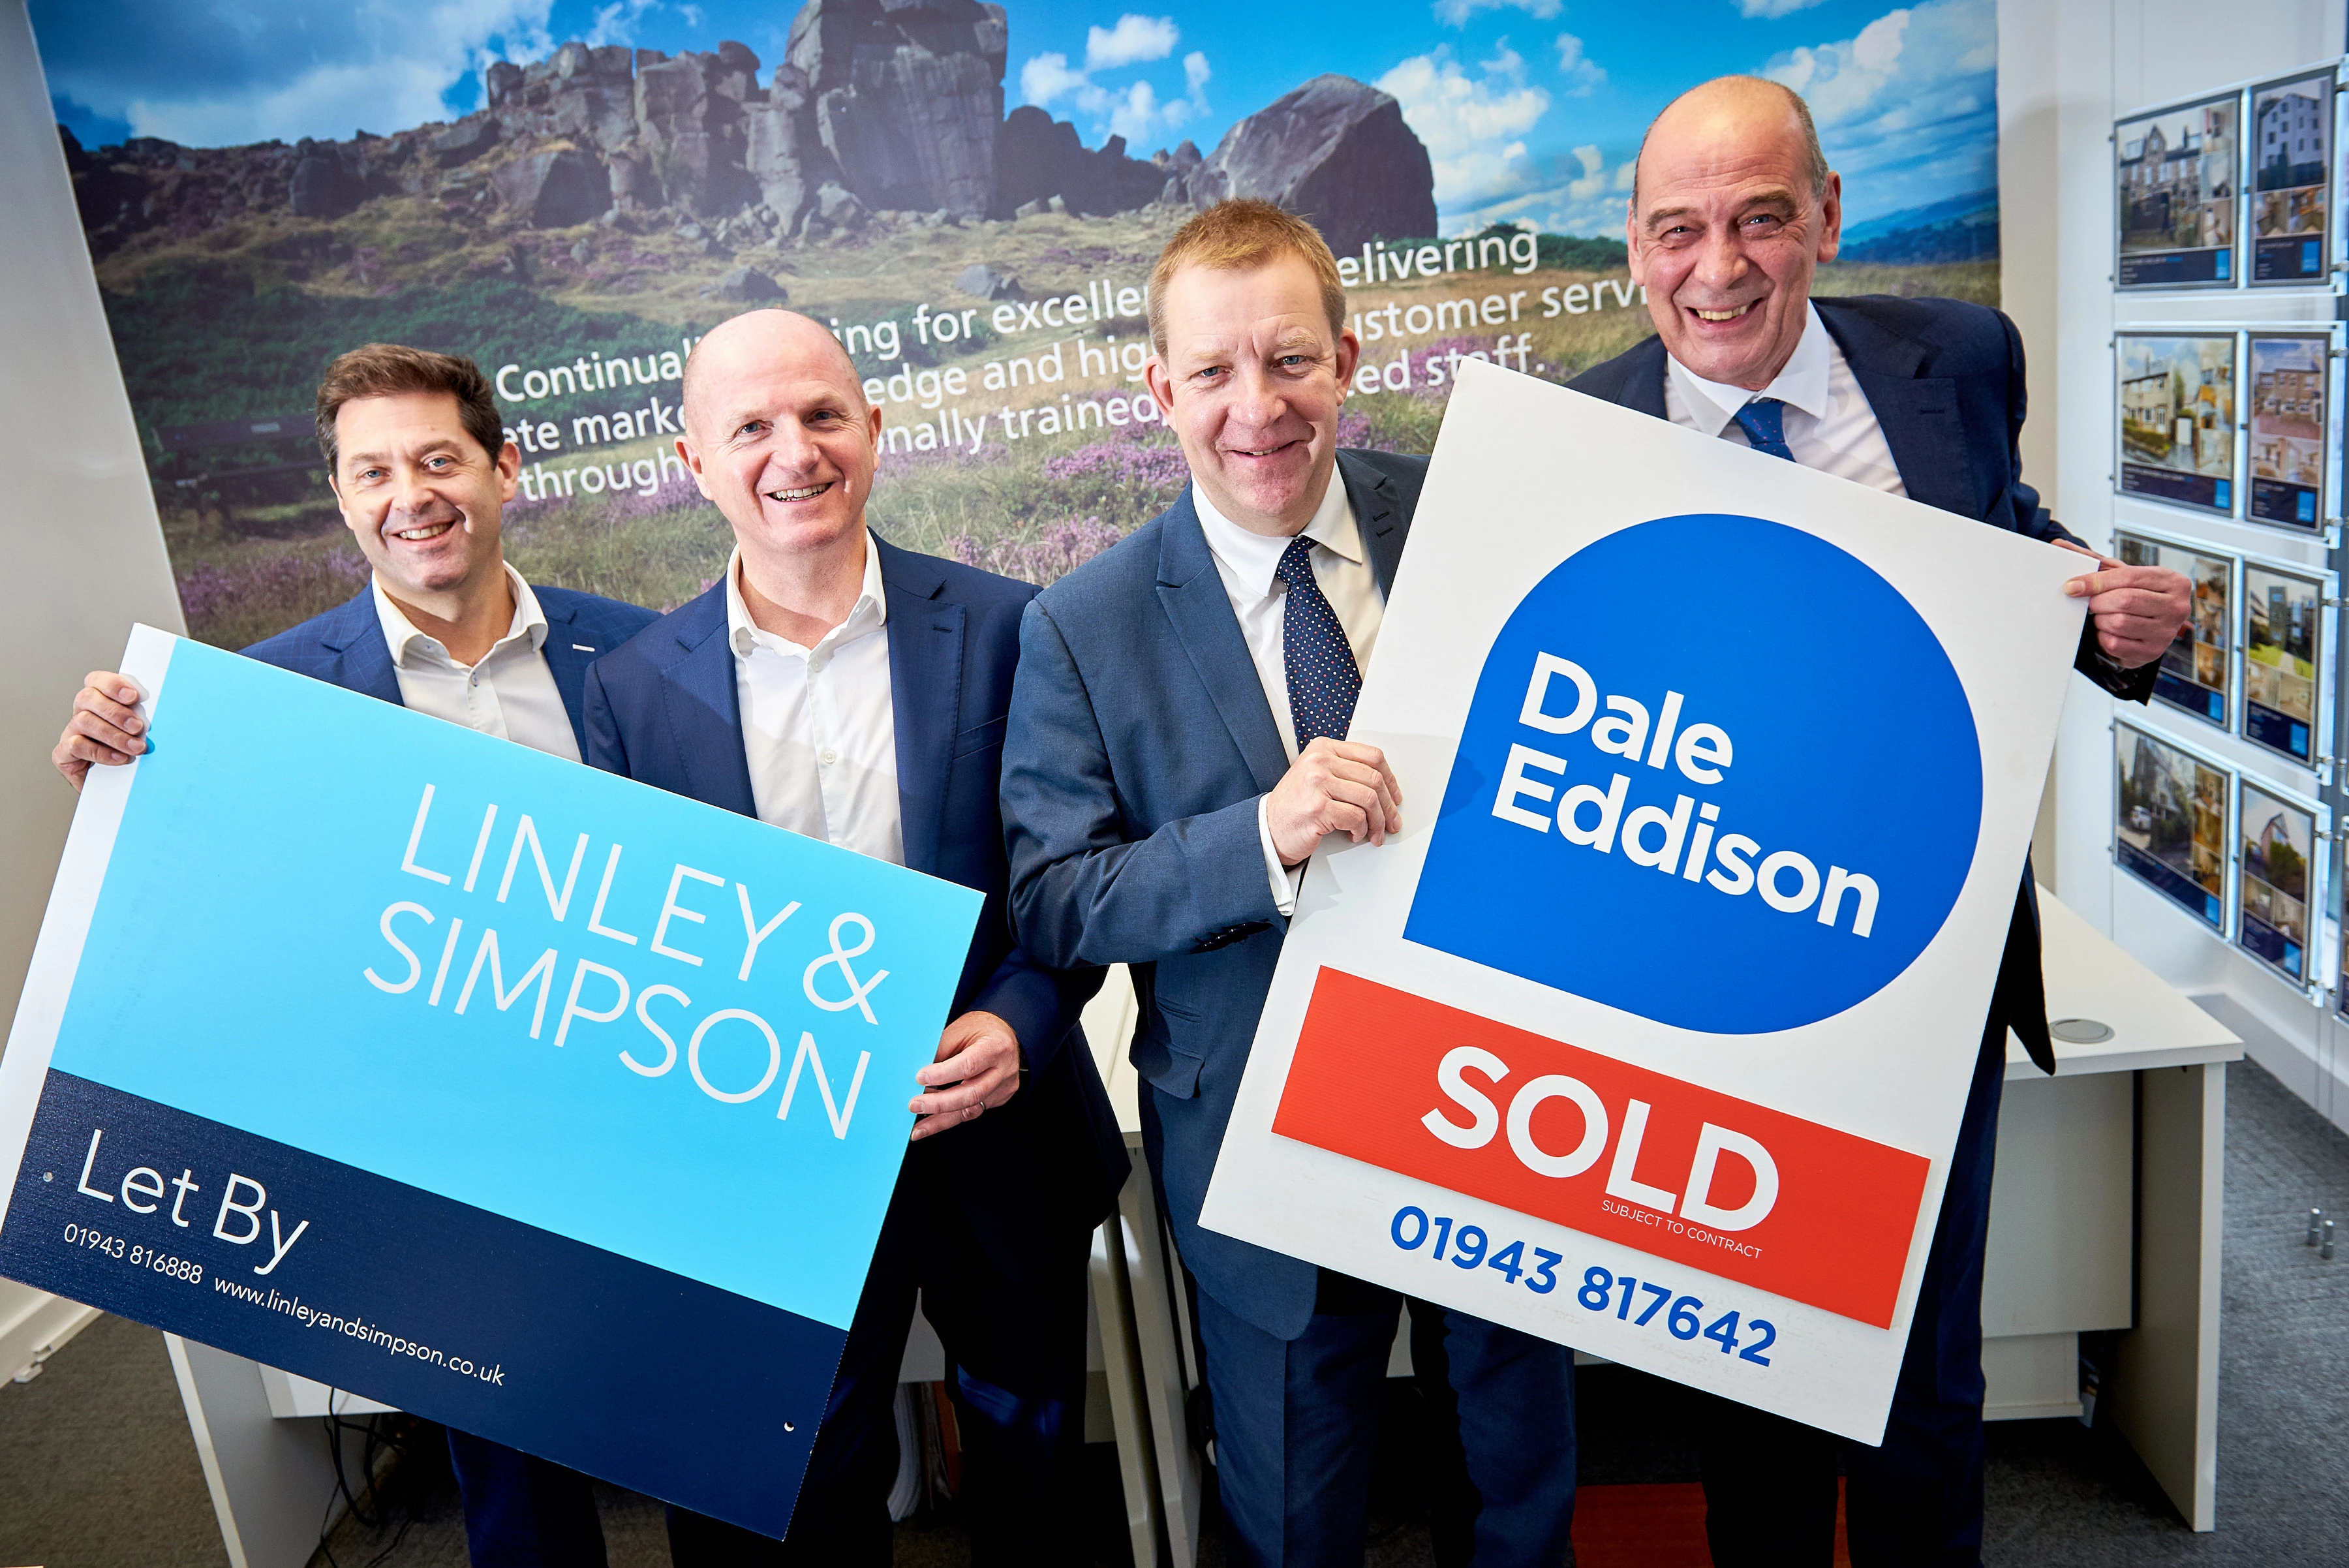 L-R: Linley & Simpson founders Nick Simpson and Will Linley with Bill Dale and William Eddison of Dale Eddison